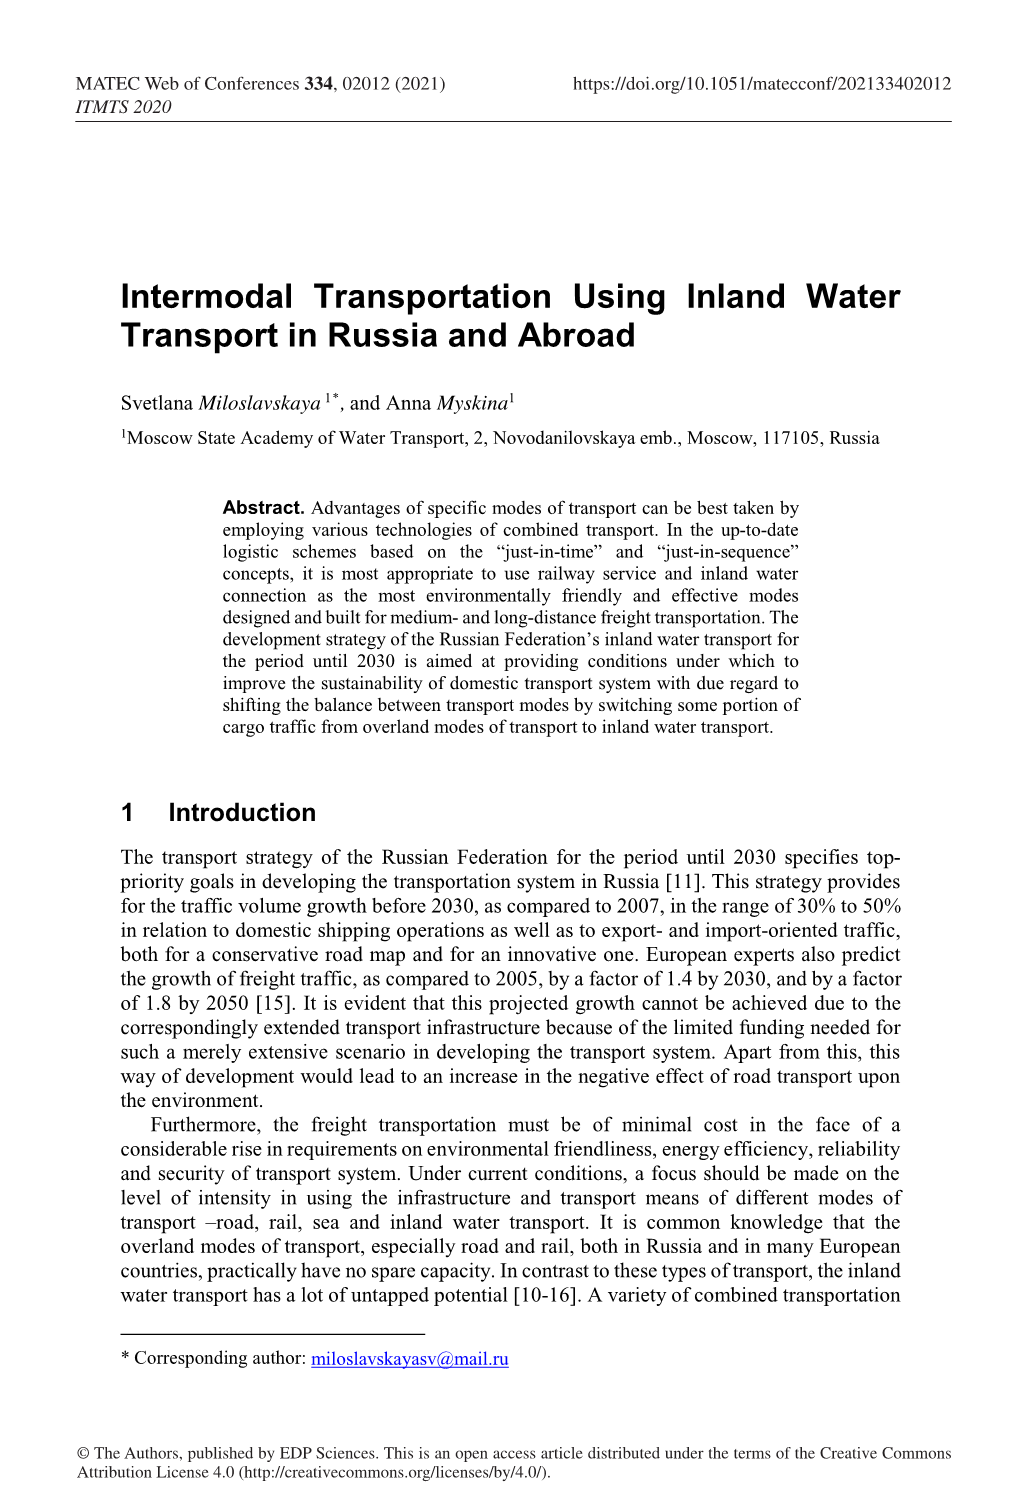 Intermodal Transportation Using Inland Water Transport in Russia and Abroad